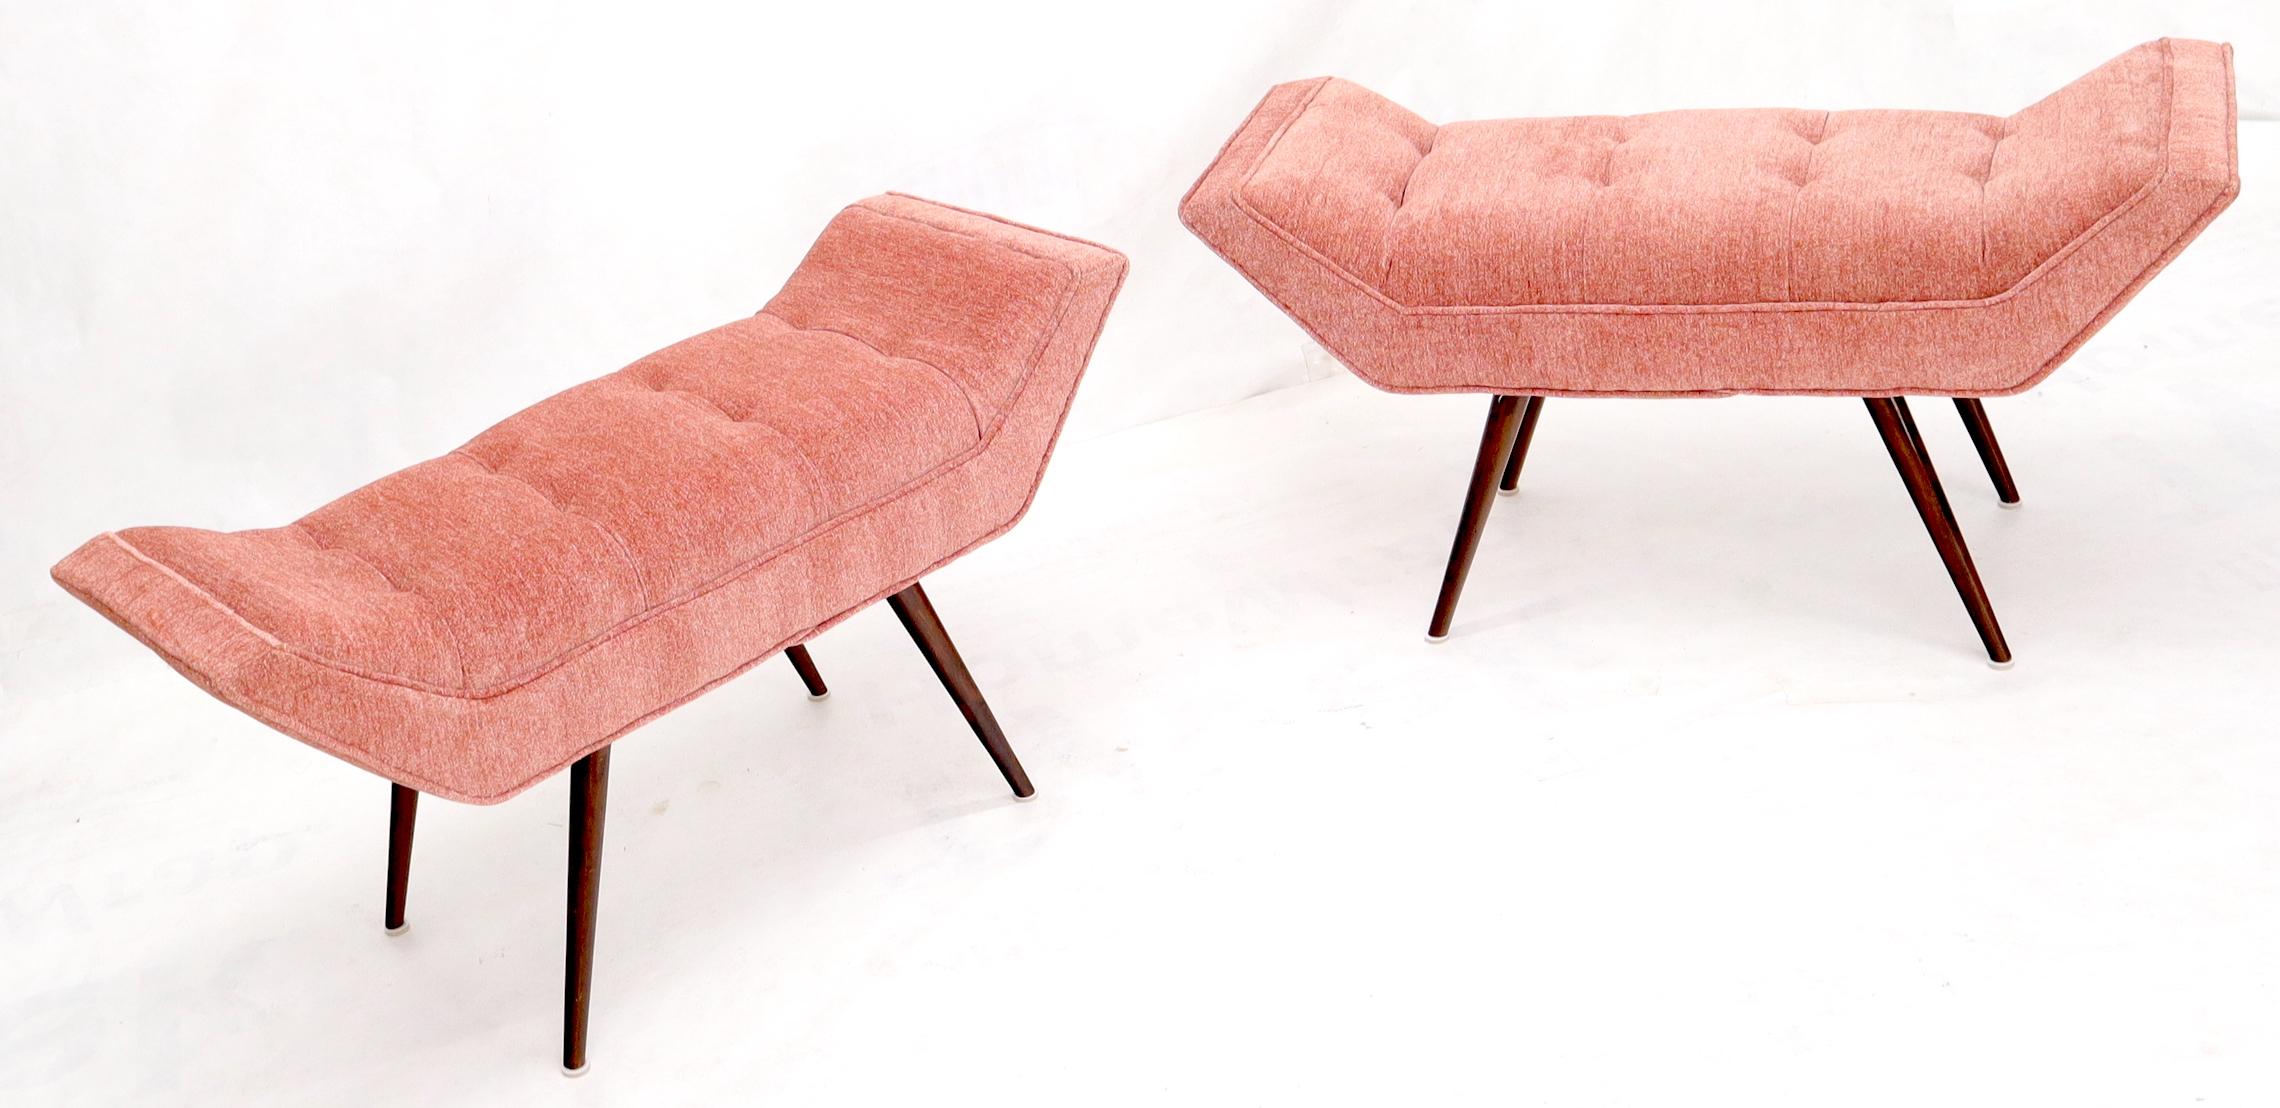 Pair of Mid-Century Modern Pink Velvet Upholstery Dowel Legs Benches In Good Condition For Sale In Rockaway, NJ